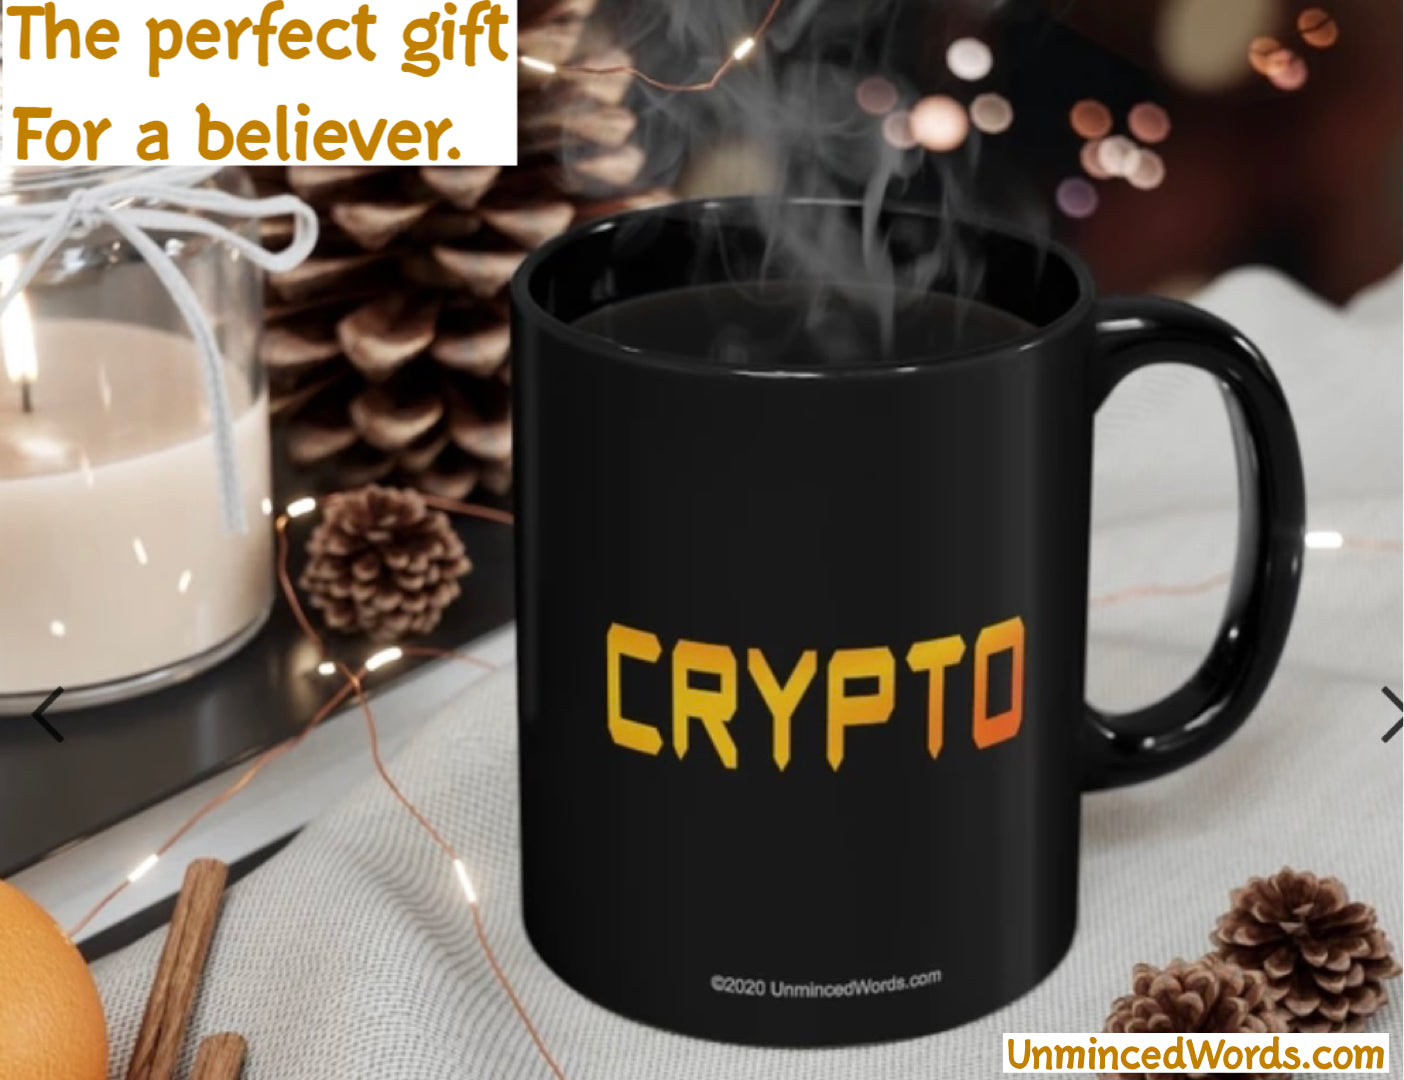 Crypto believers, start your day off right.